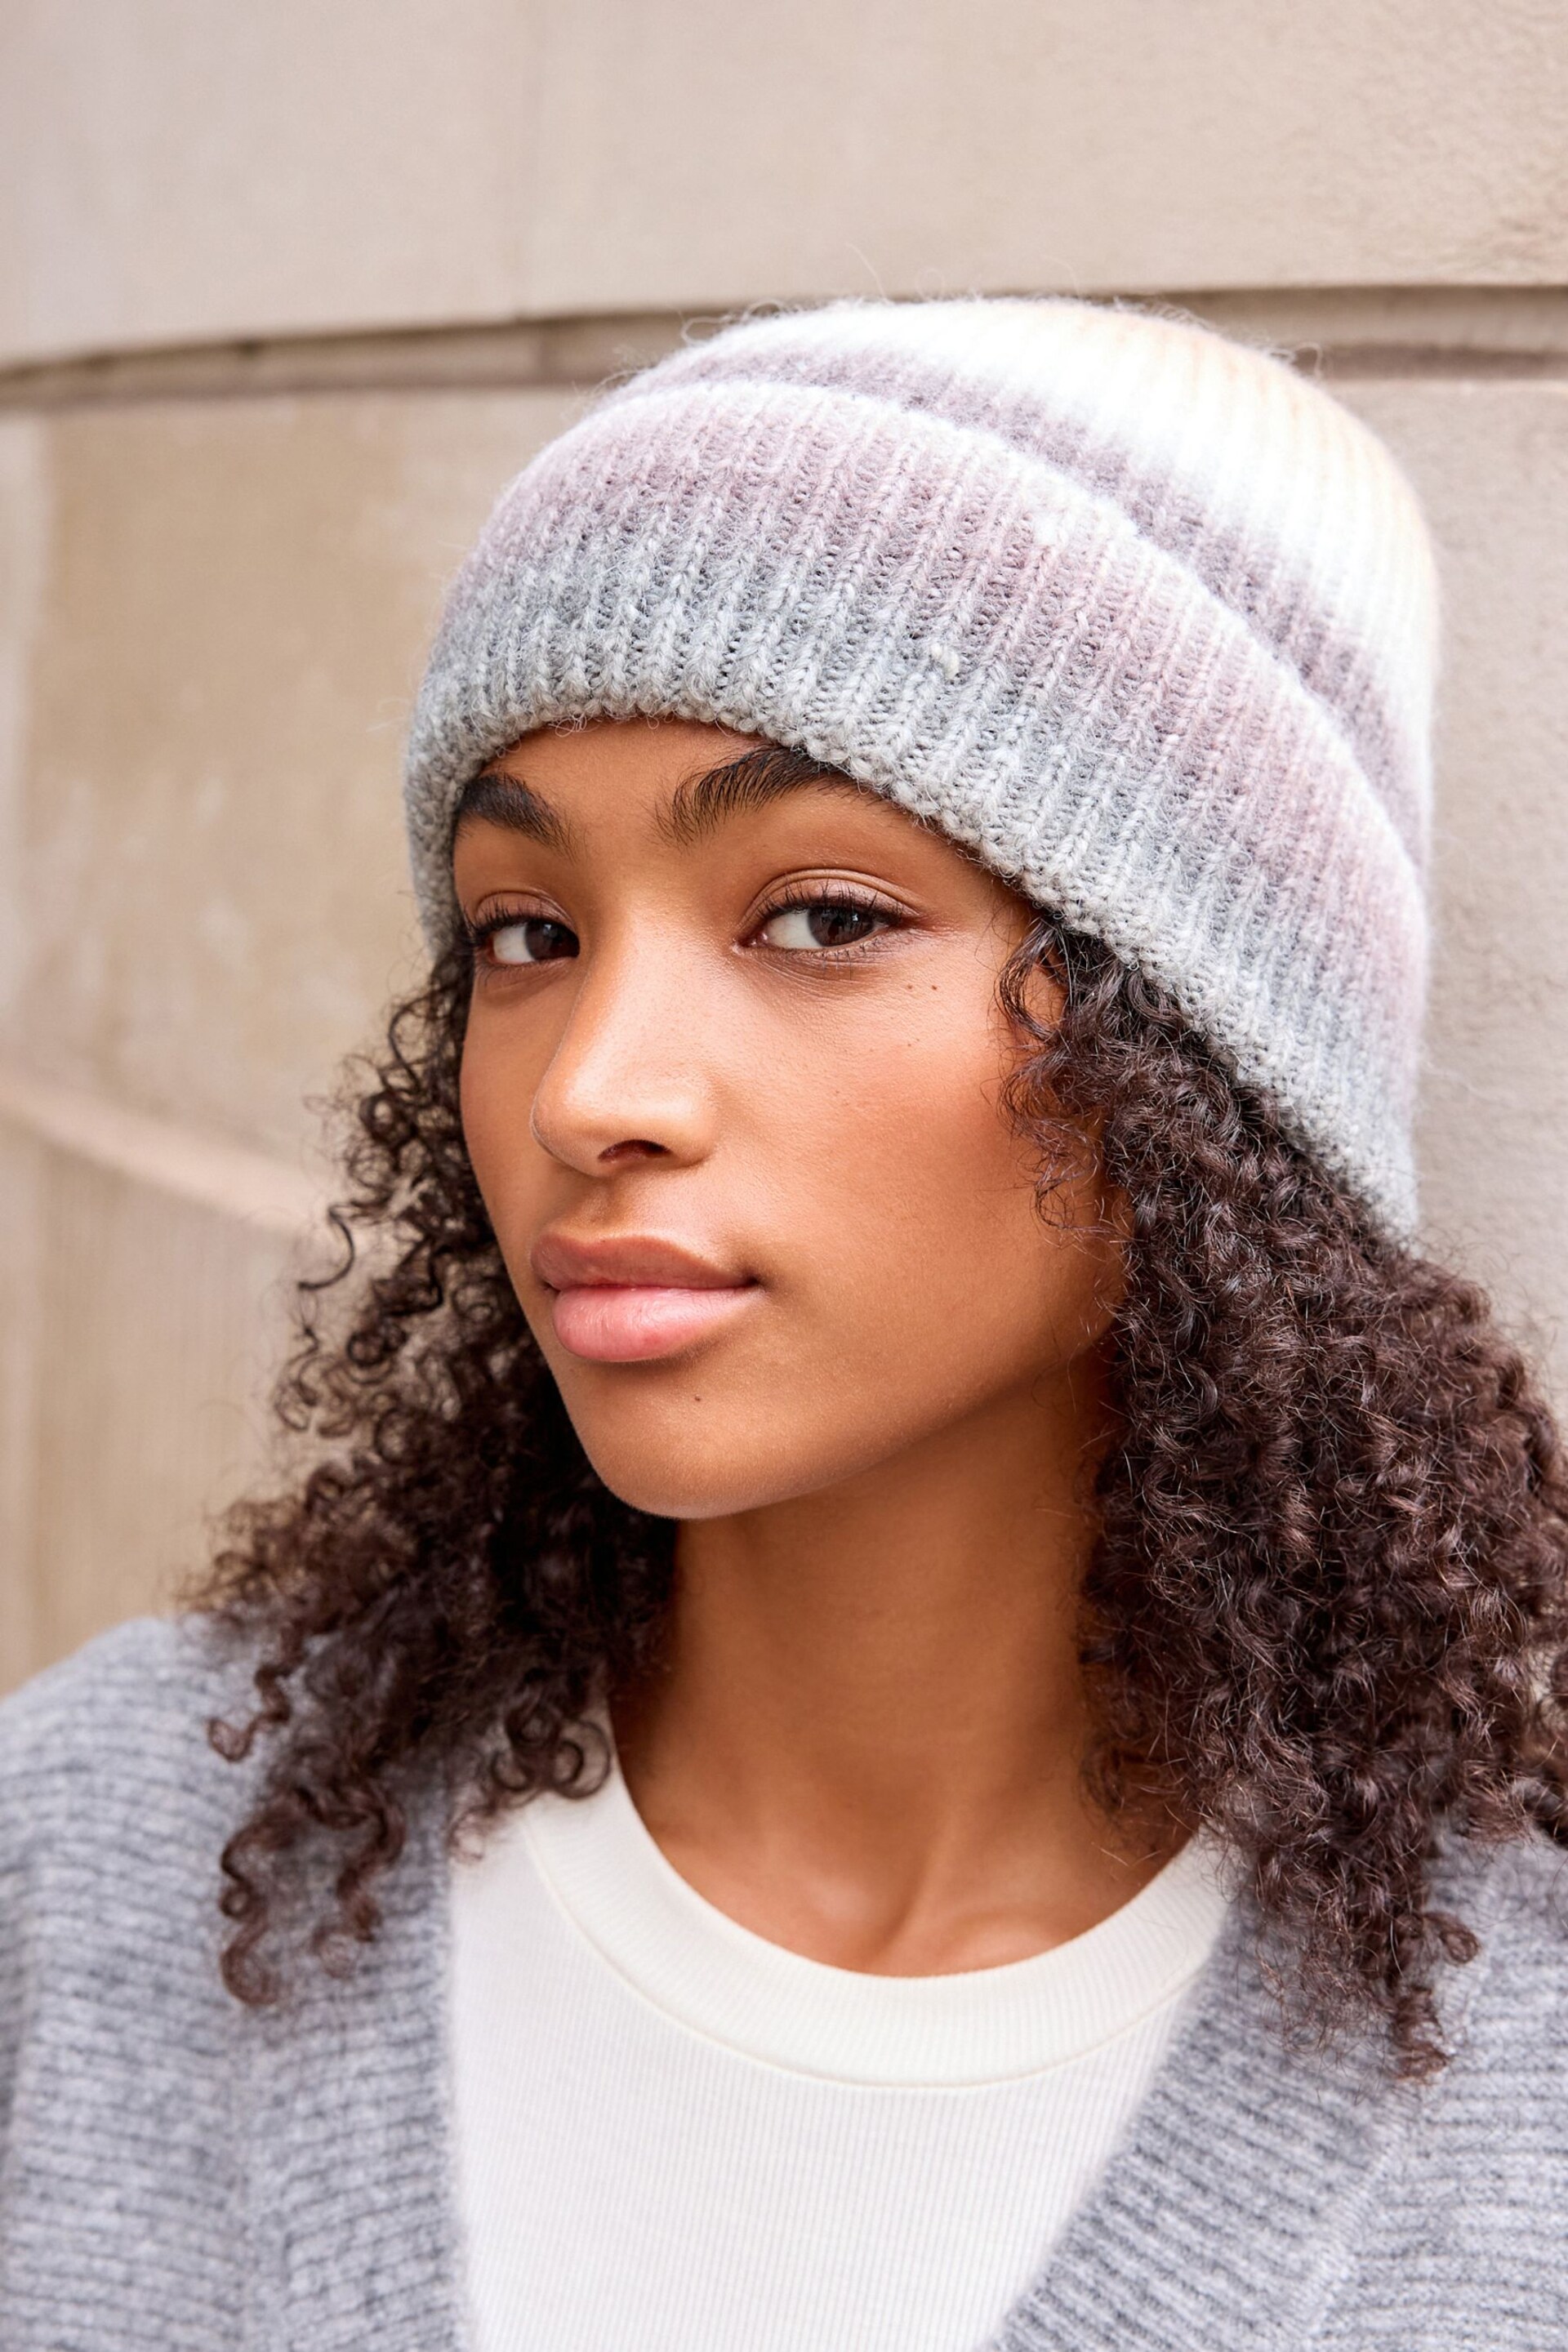 Monochrome Ombre Beanie Hat - Image 1 of 4